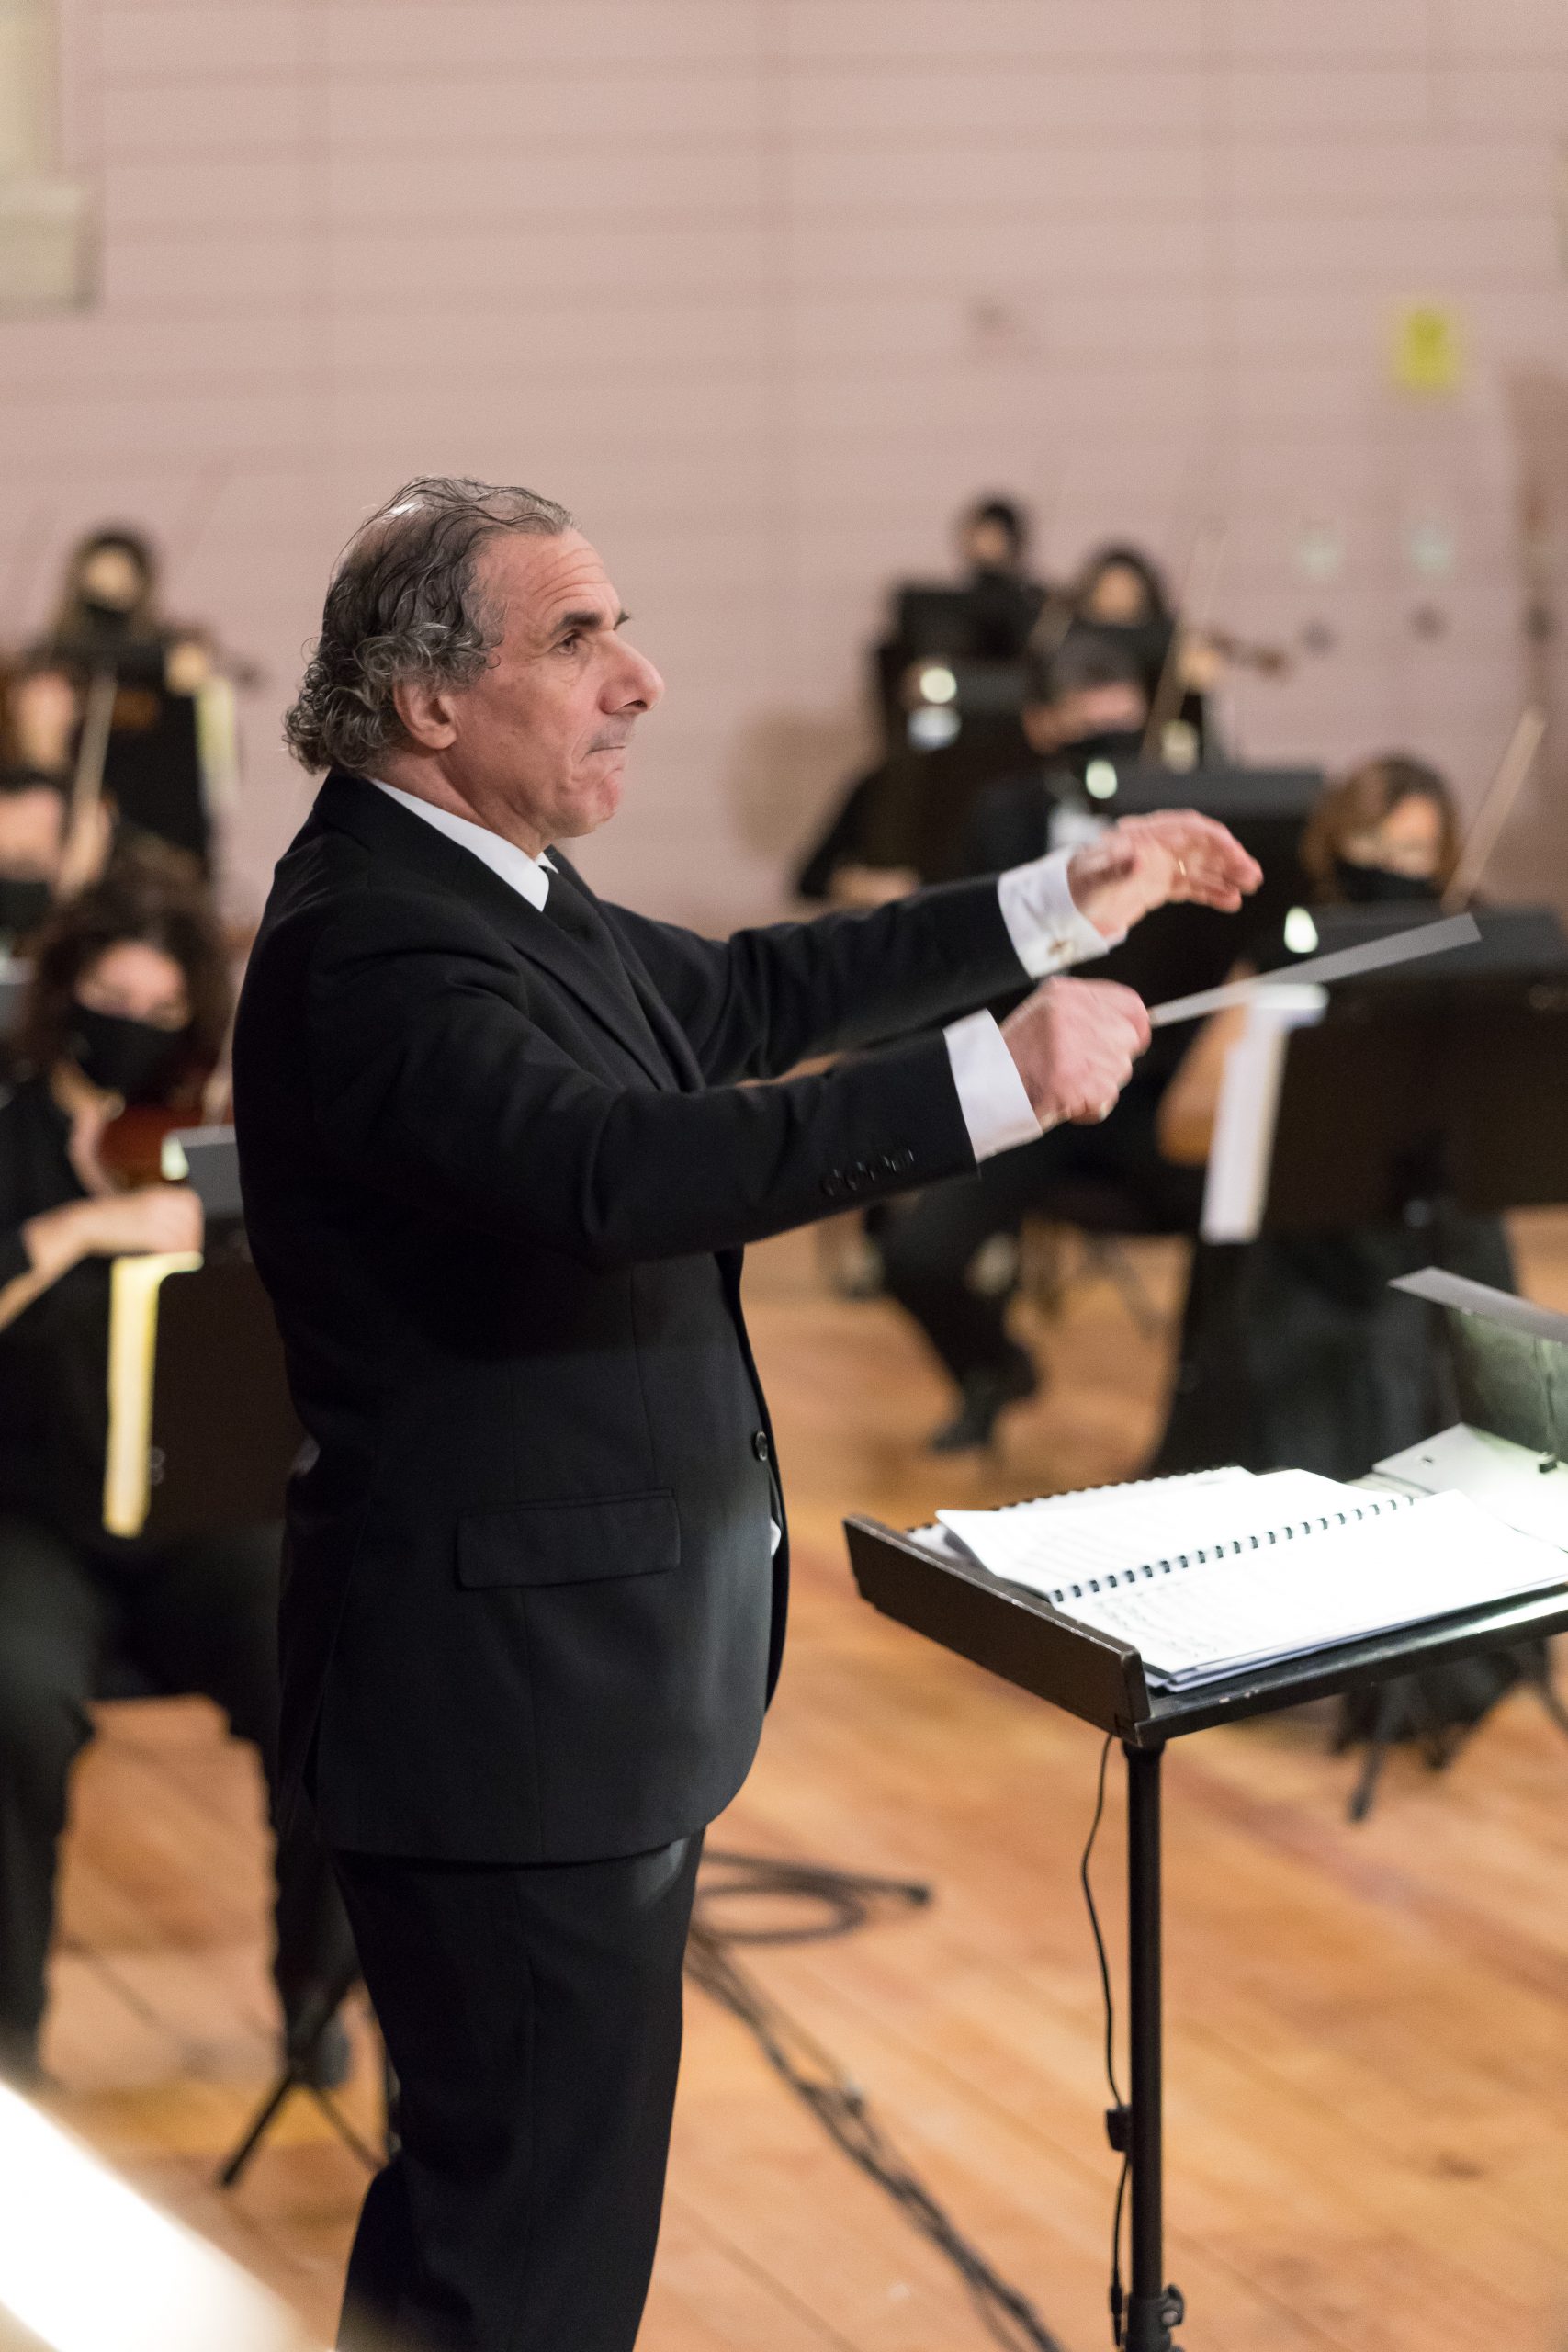 Conductor Colin Attard will lead the Malta Philharmonic Orchestra for an event part of the Gaulitana in Gozo